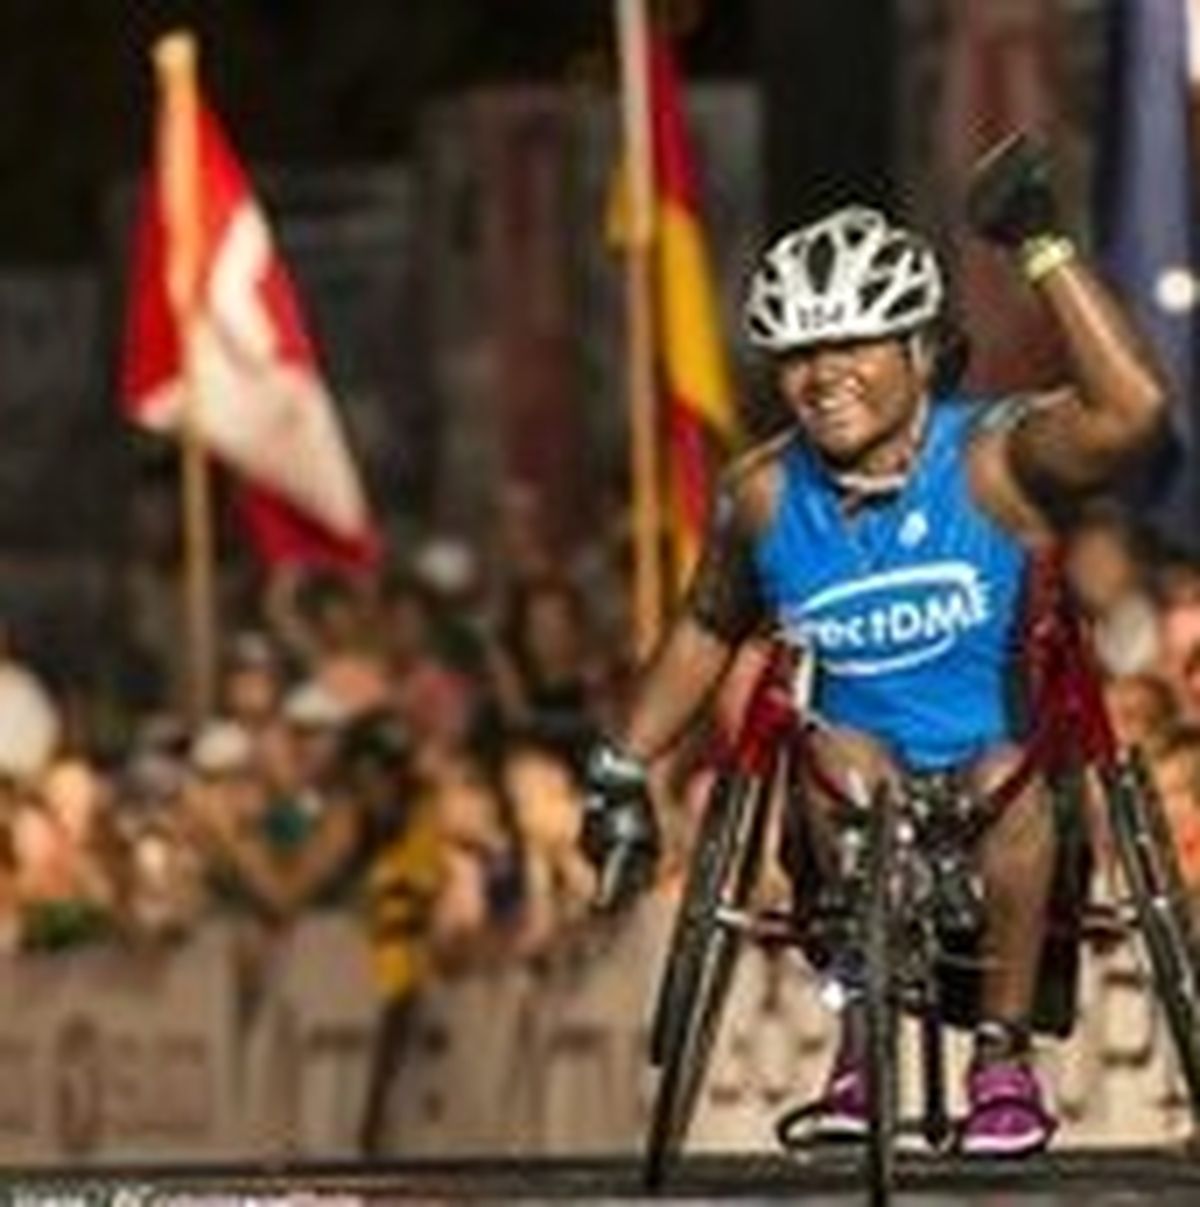 Minda Dentler became the first woman hand cyclist to complete the Ironman World Championship.